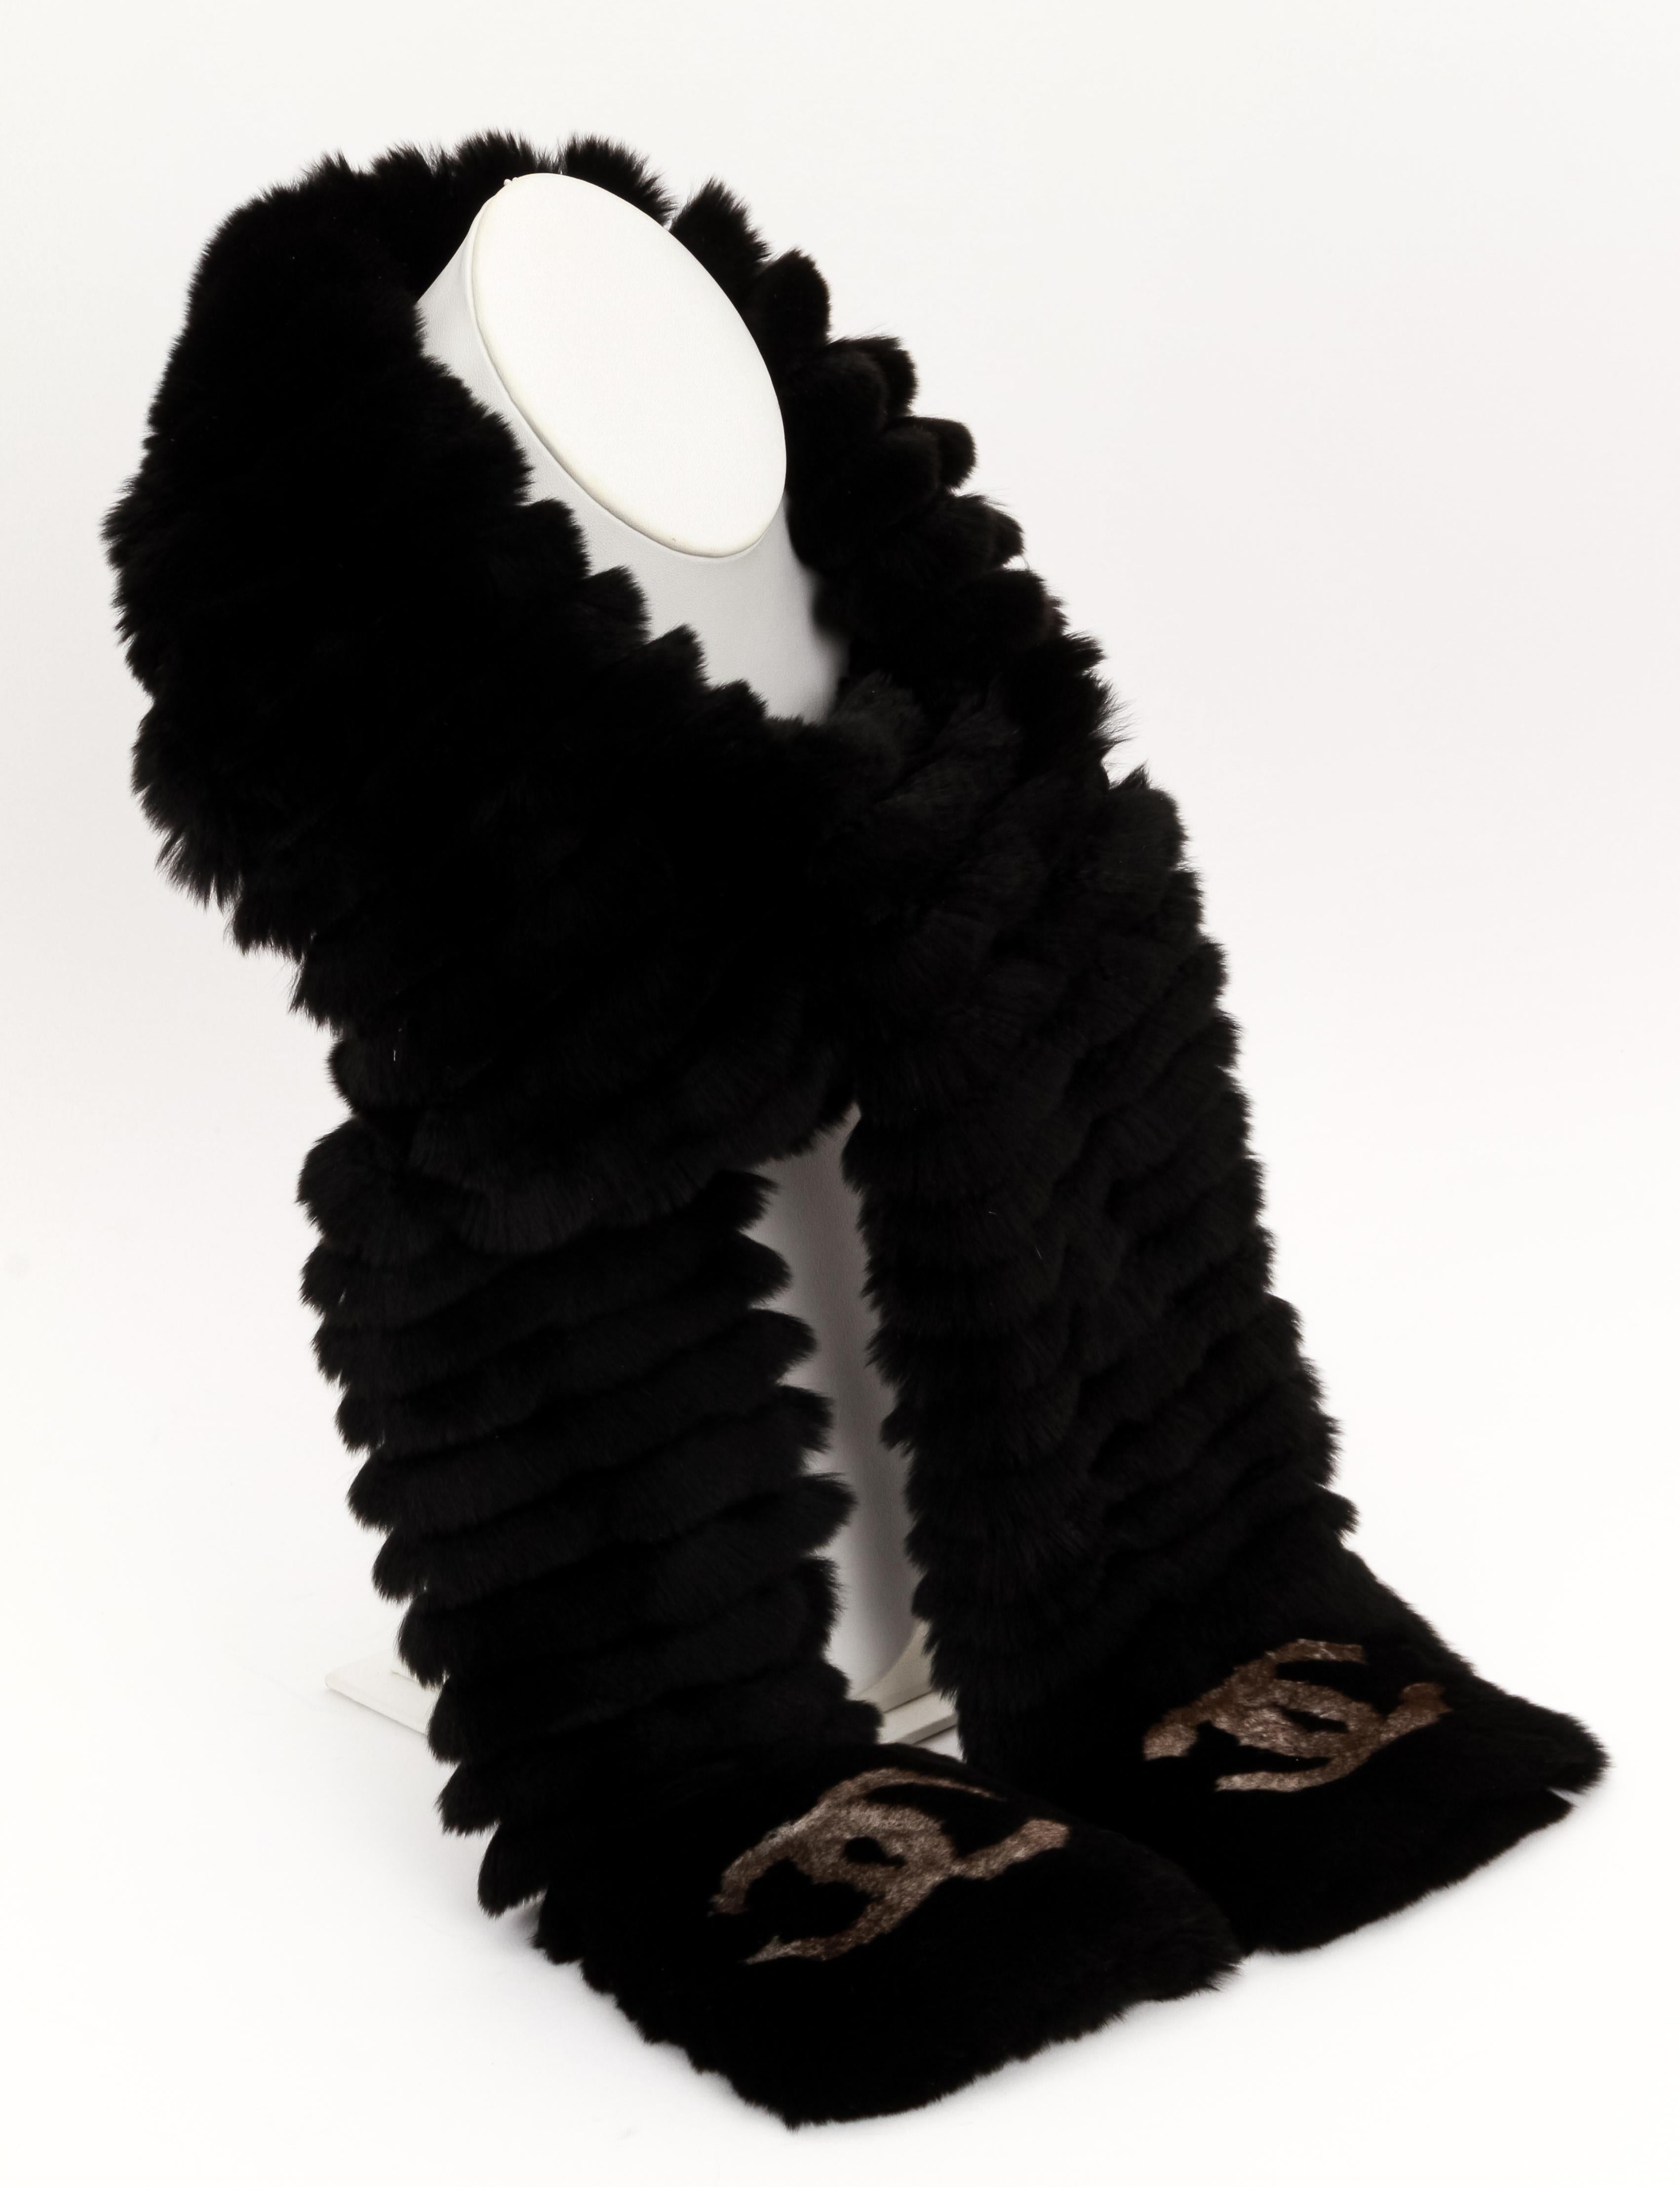 Chanel mint condition black orylag fur scarf . Chanel cc in contrast color. Original care tag and dust cover.